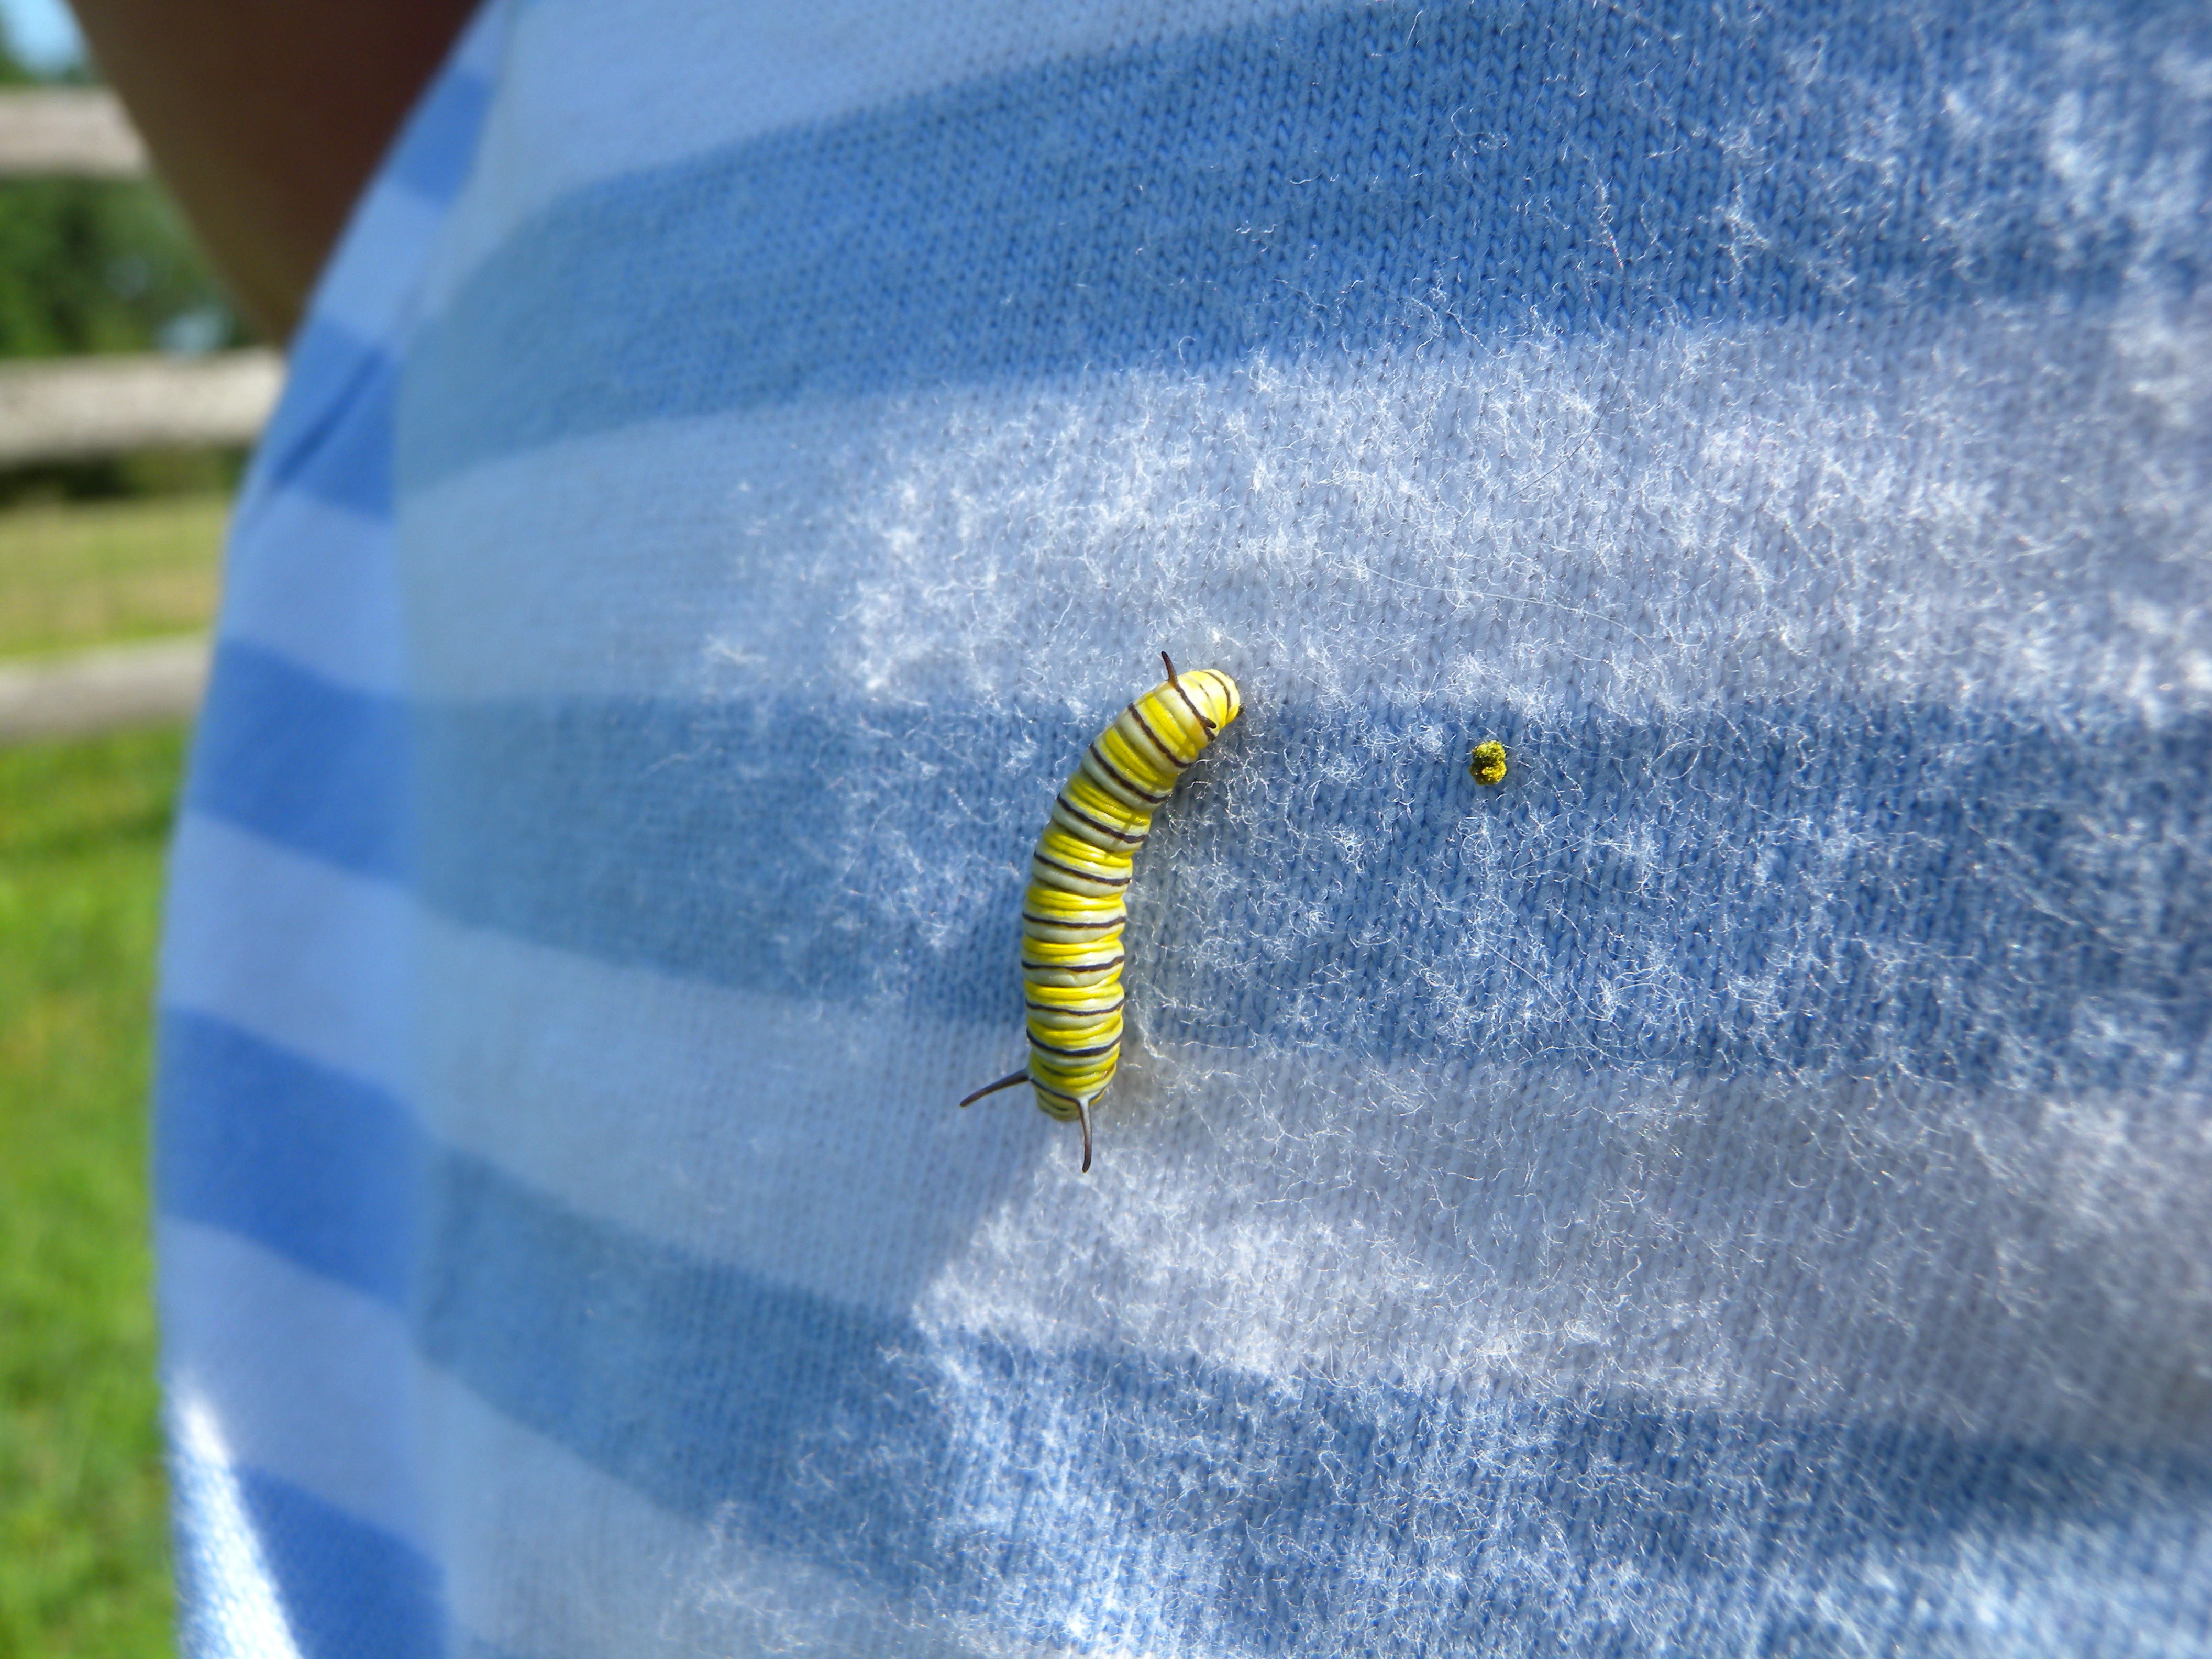 Close-up of the tiny monarch caterpillar "worn" by a Jr. Birder during the wildflower meadow exploration, July 2014.